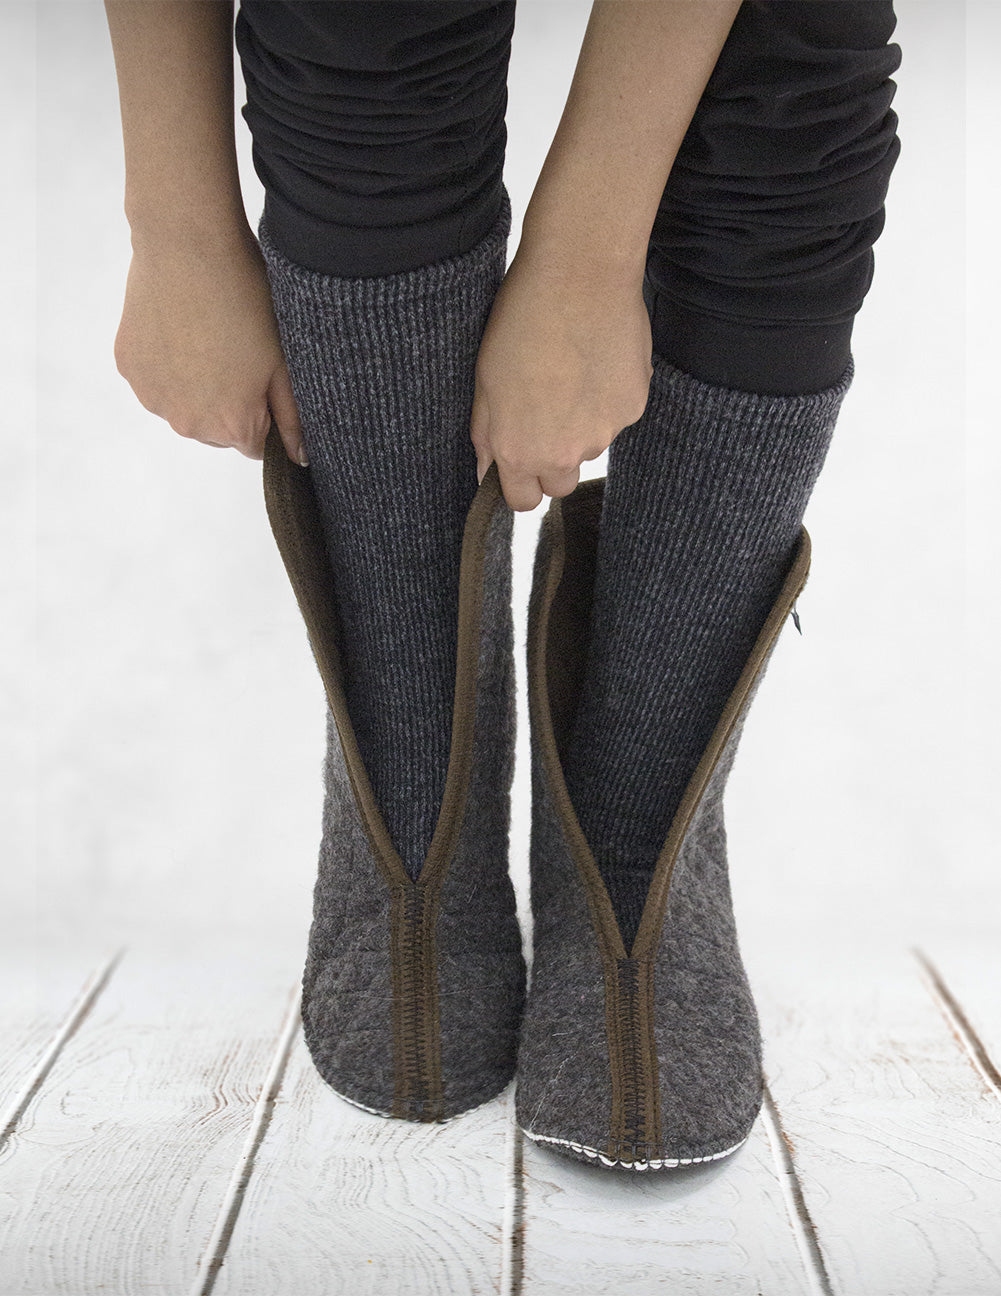 The Felt Store's Wool Boot Liners on Sale